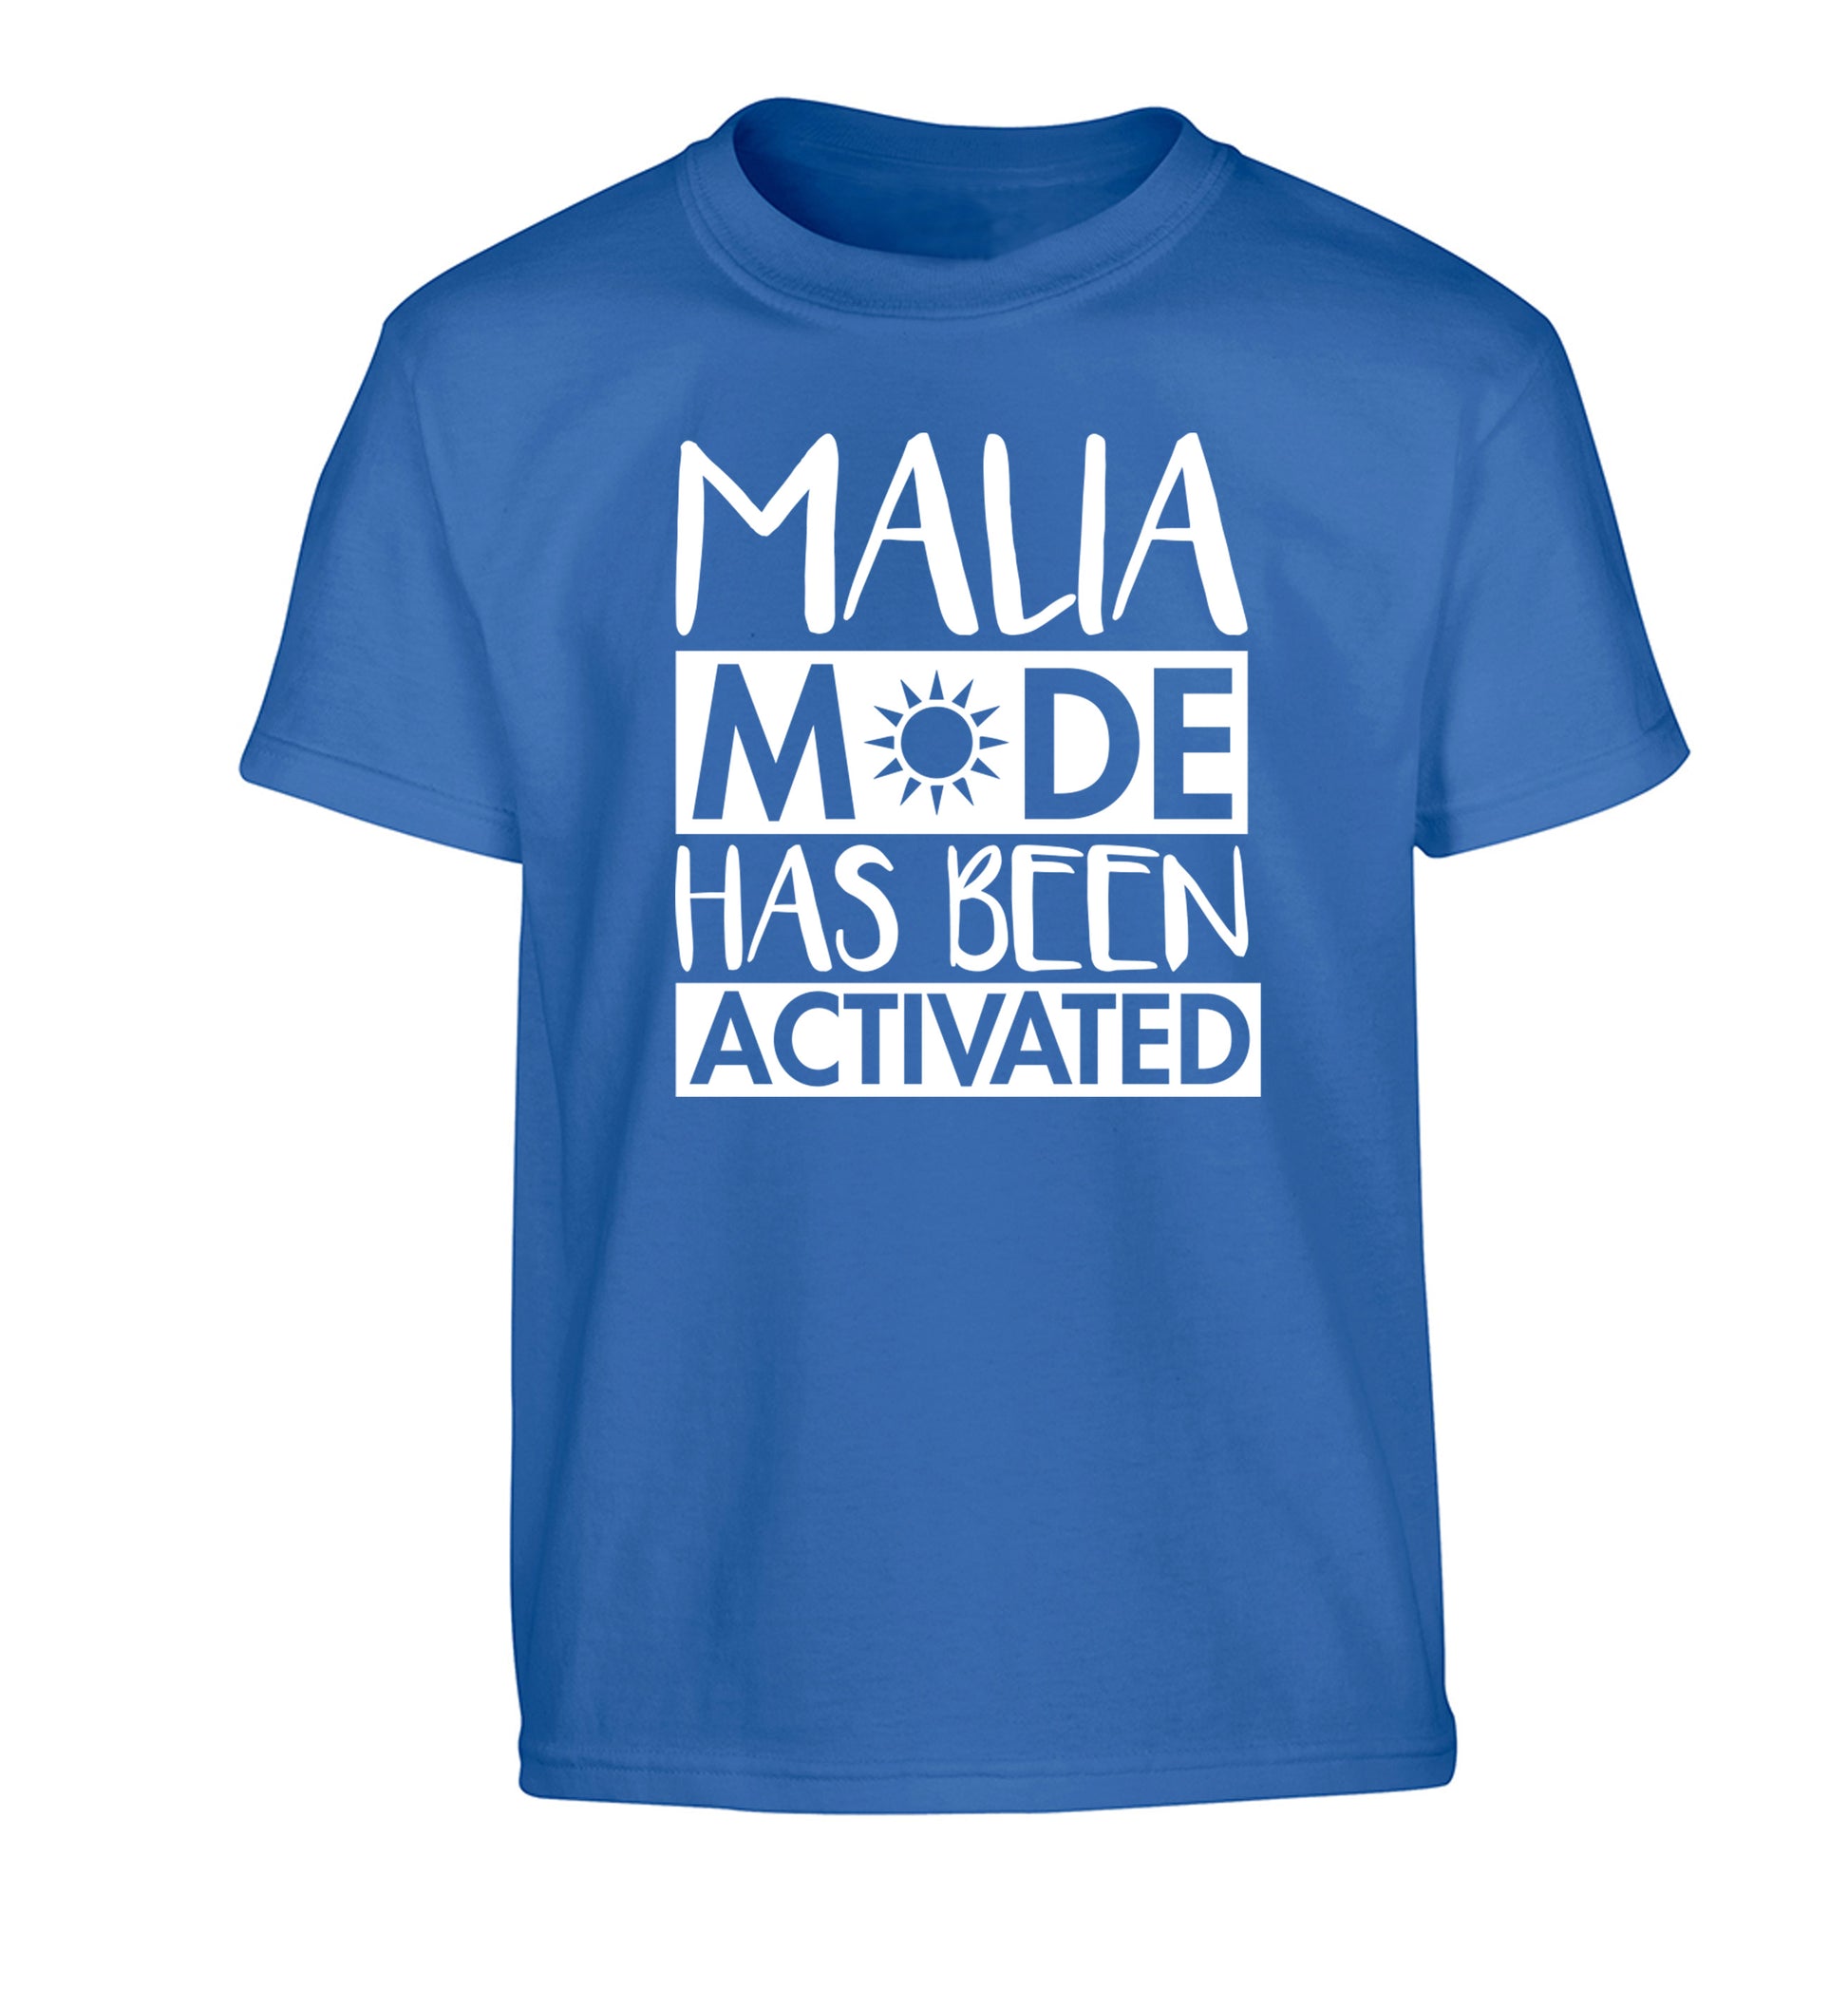 Malia mode has been activated Children's blue Tshirt 12-13 Years